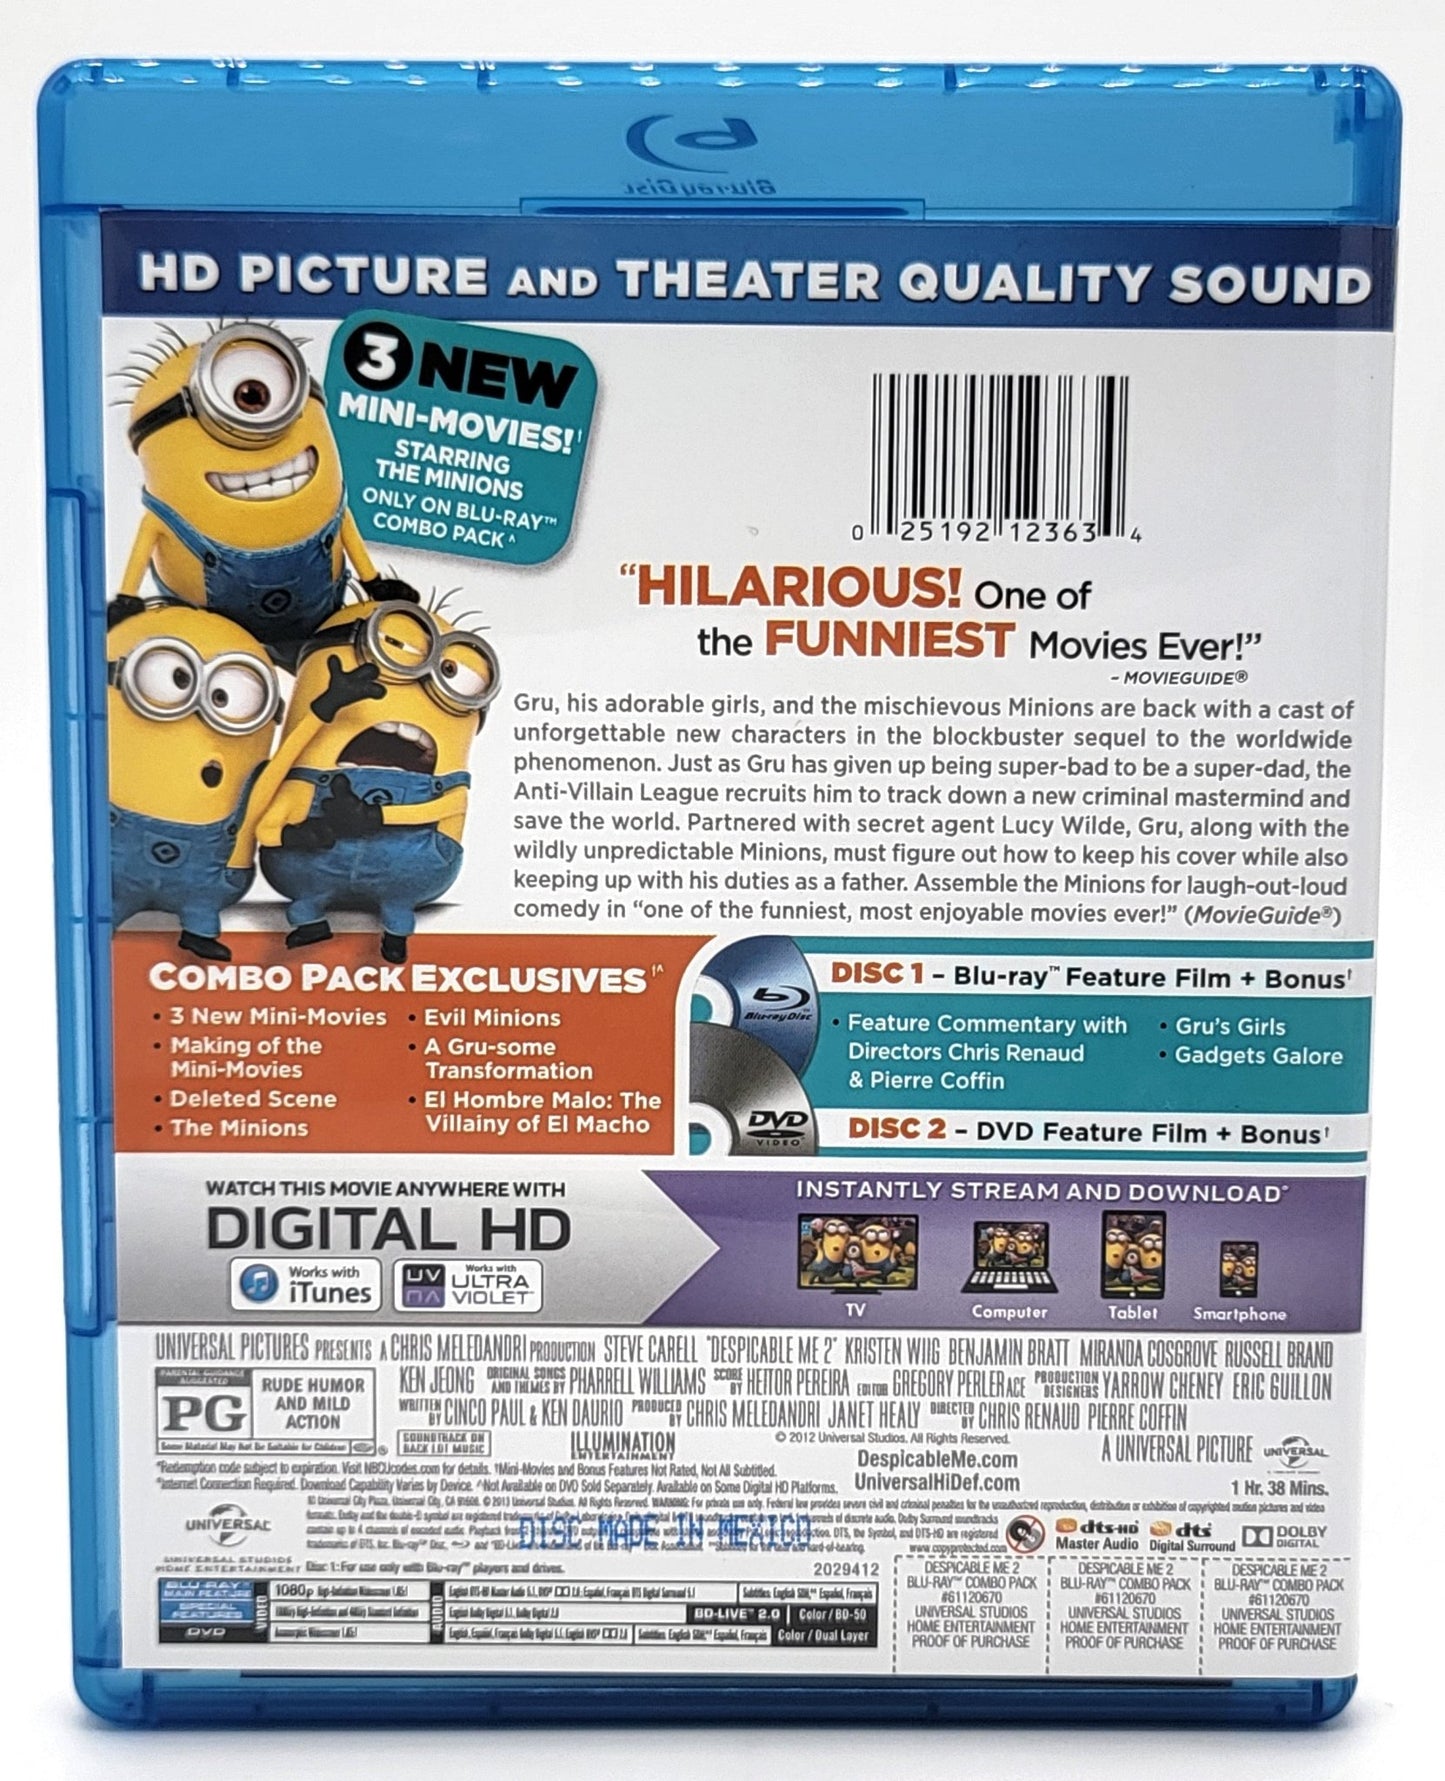 Illumination Entertainment, - Despicable ME 2 | Blu-ray & DVD | Includes 3 New Mini Movies - DVD & Blu-ray - Steady Bunny Shop